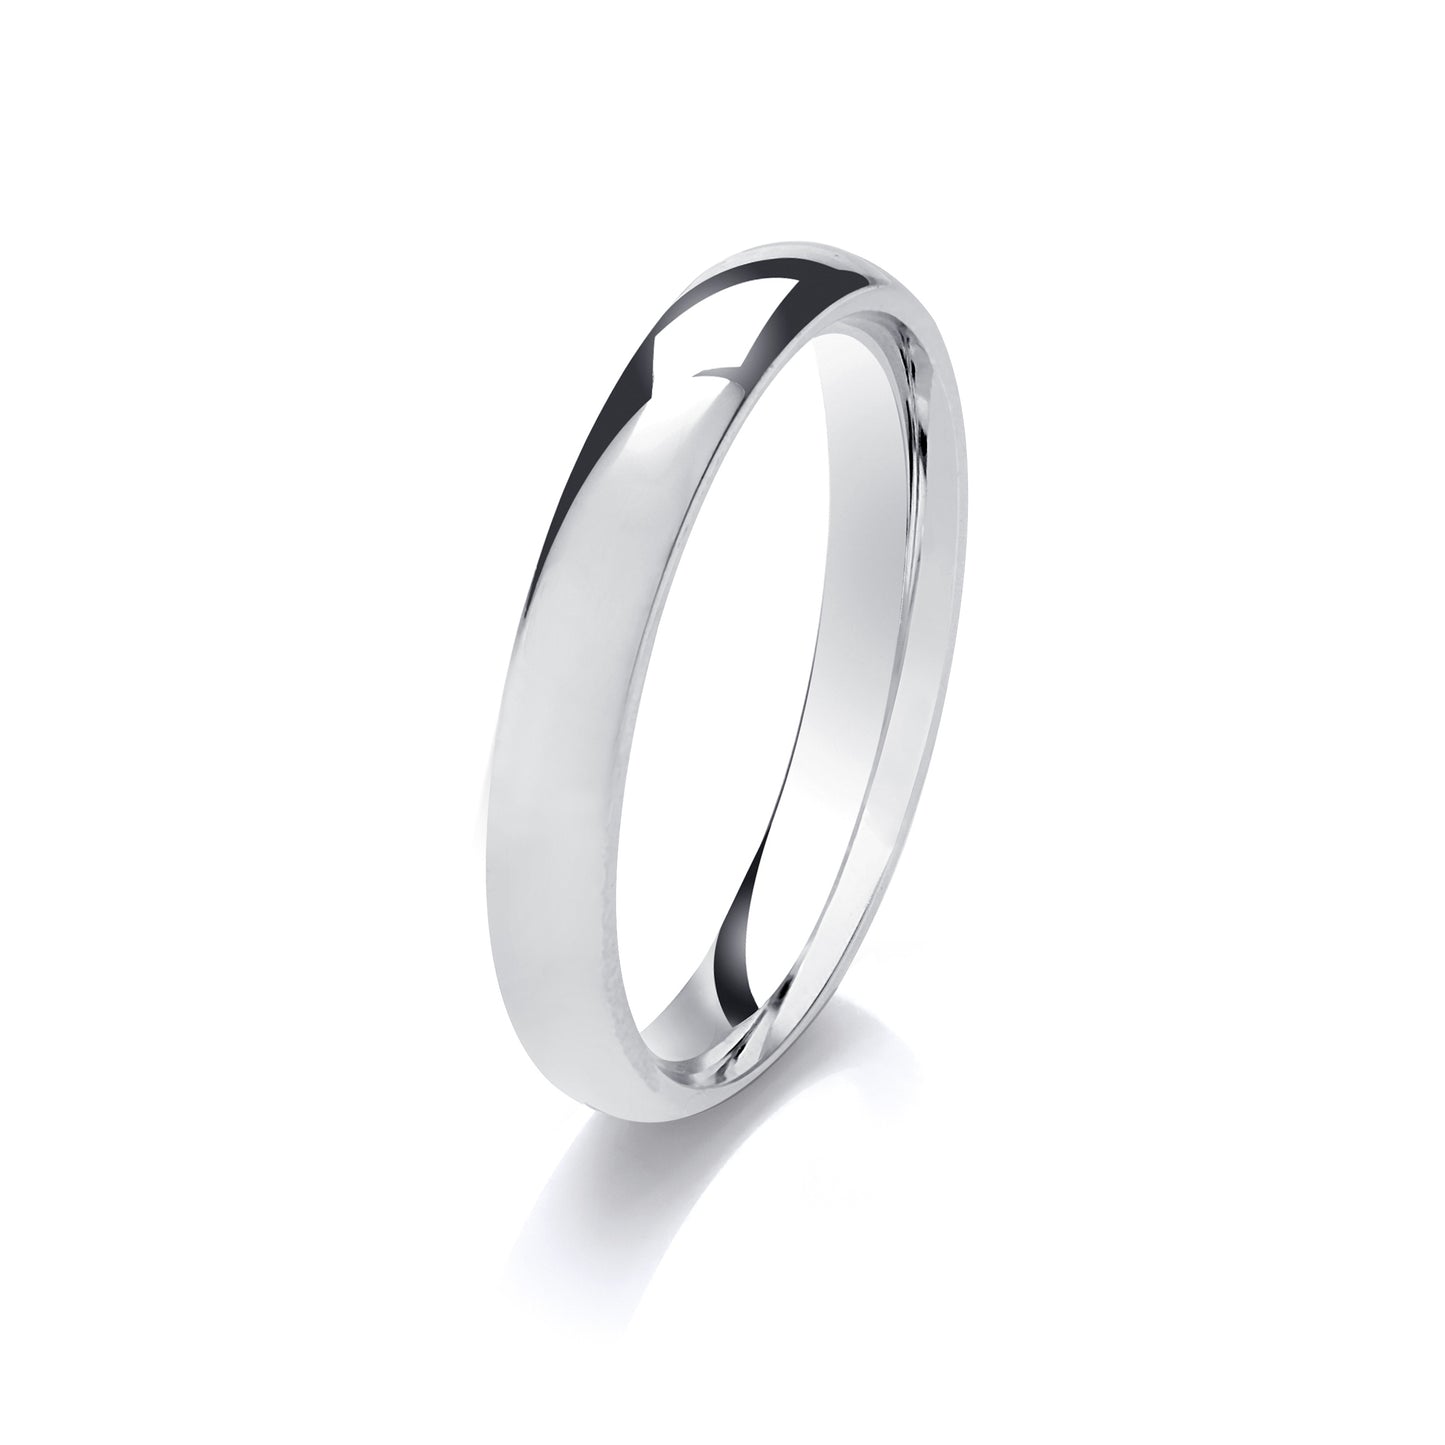 18ct White Gold 3mm Medium Weight Traditional Court Wedding Ring